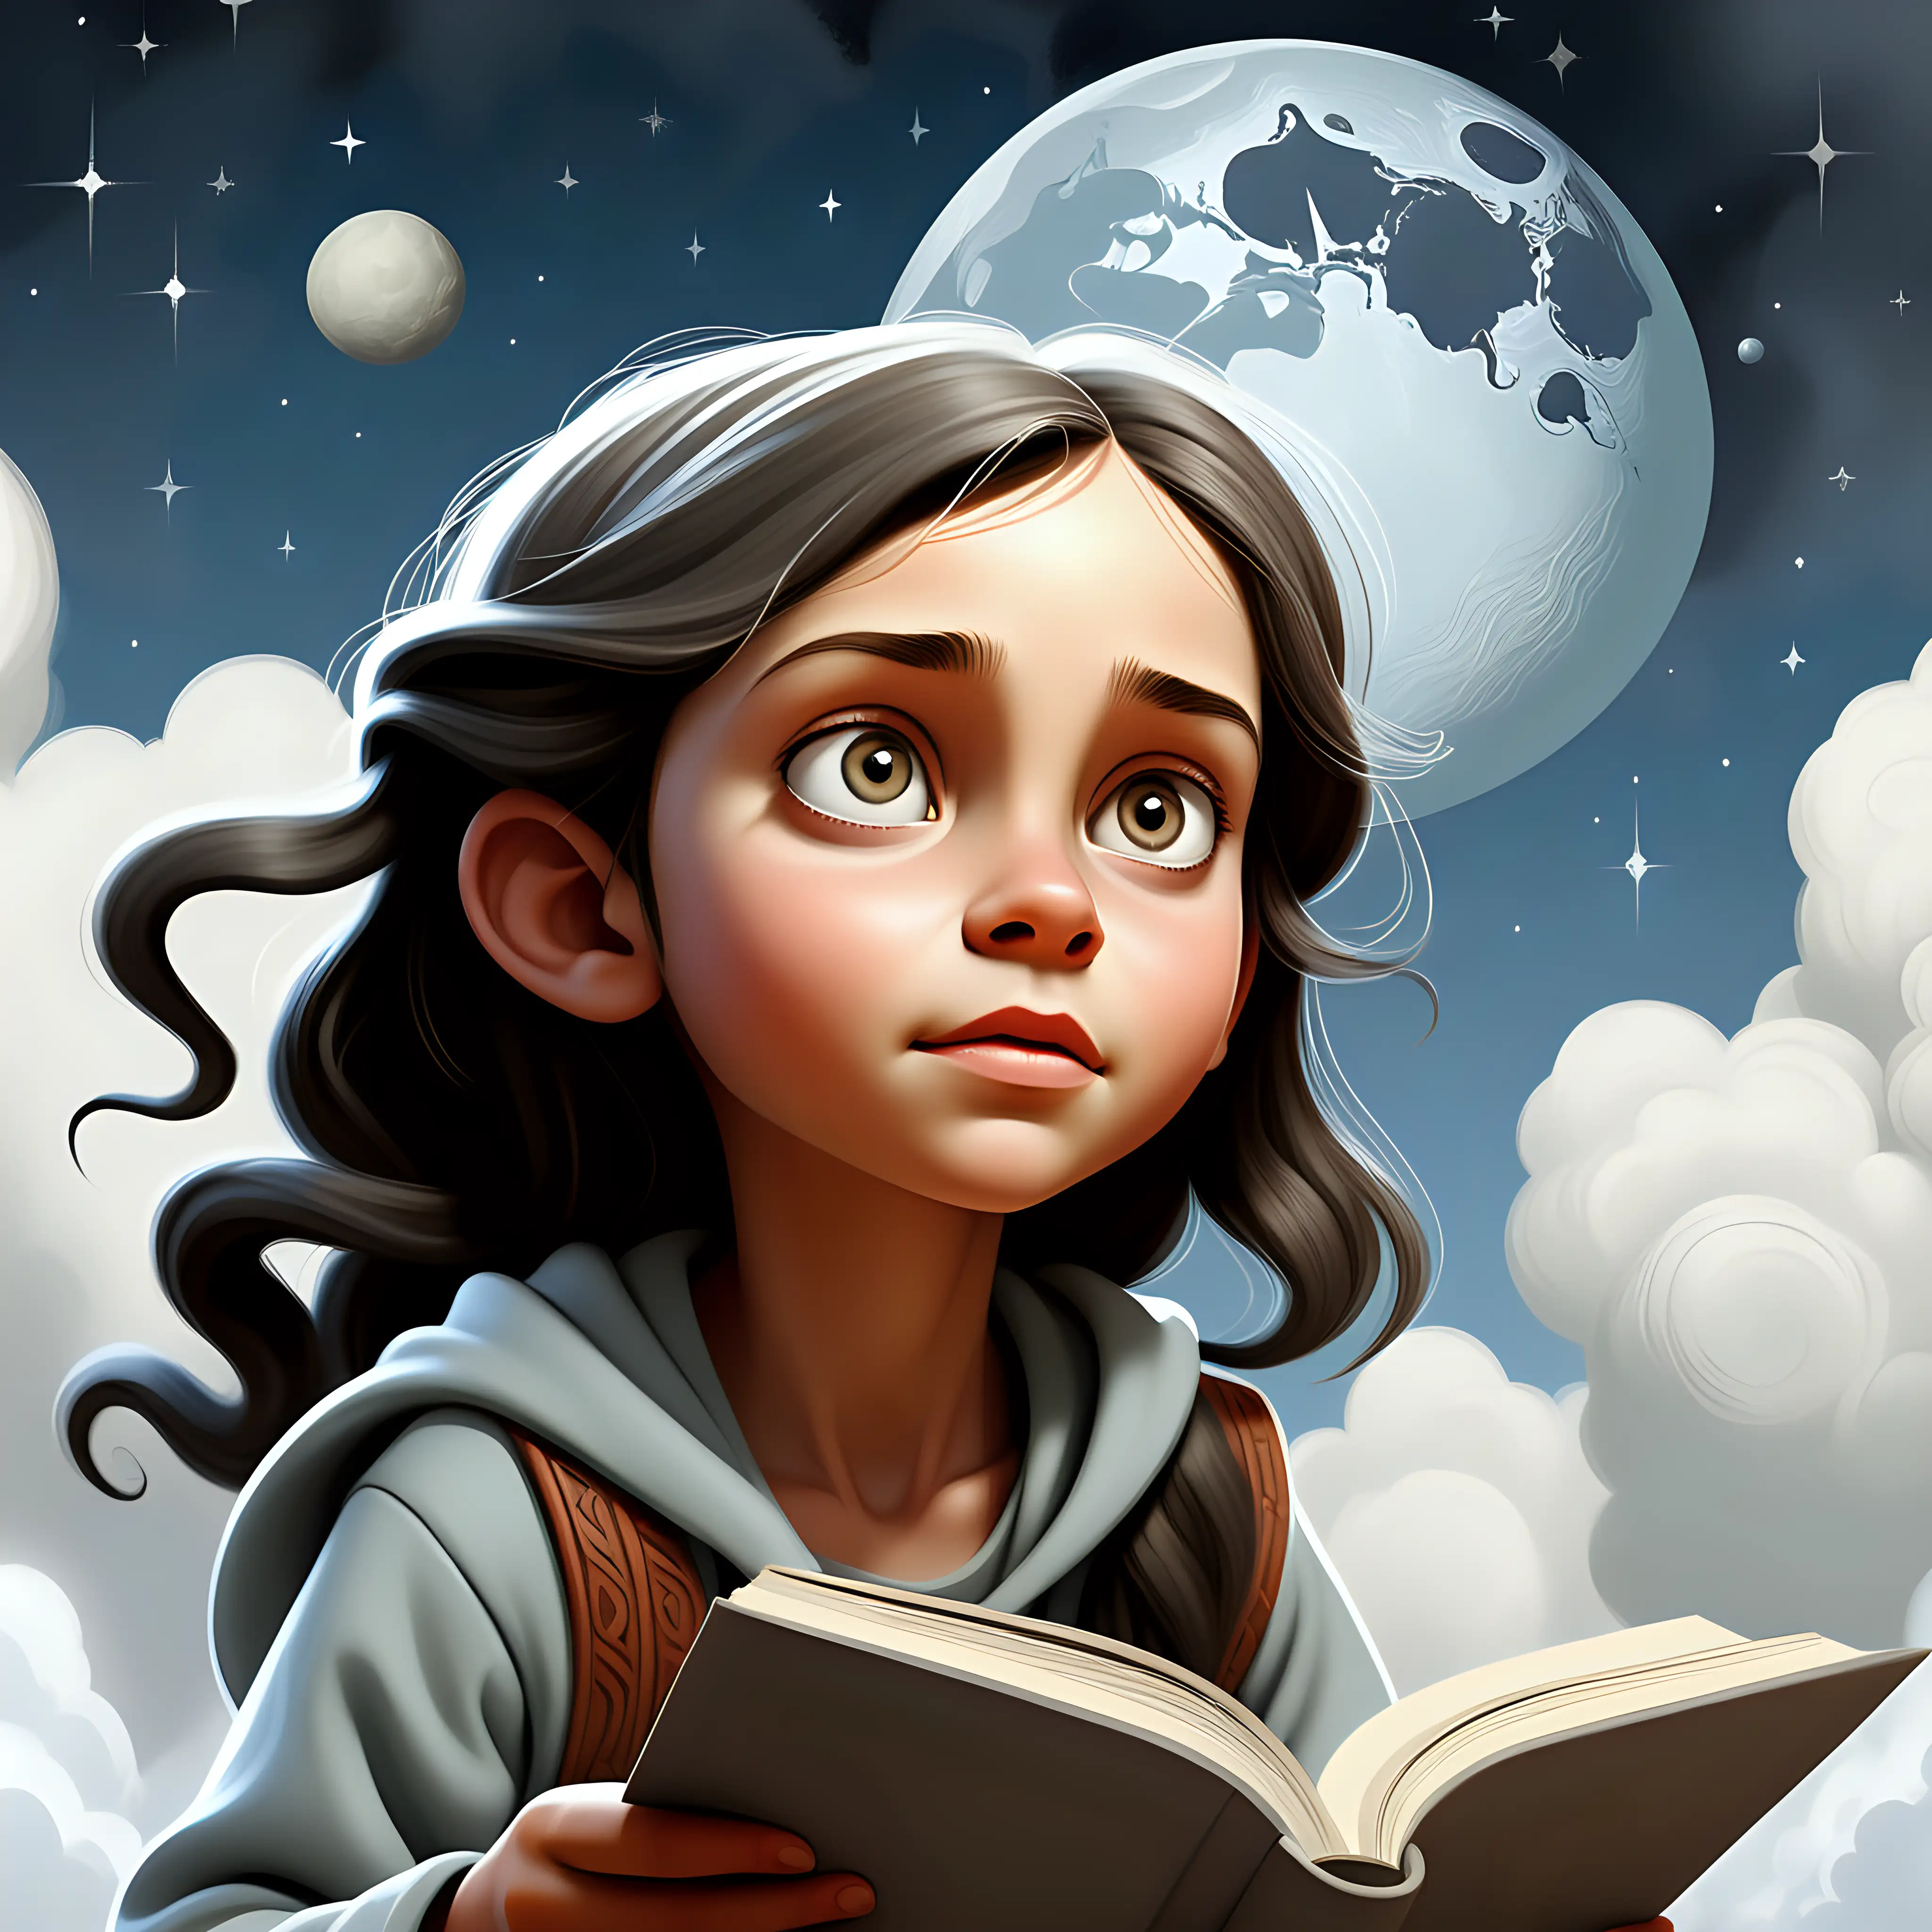 10 year-old girl who looks like Joslyn Arwen Reed, in the sky looking at ater tumti, children's picture book, illustration, on a white background